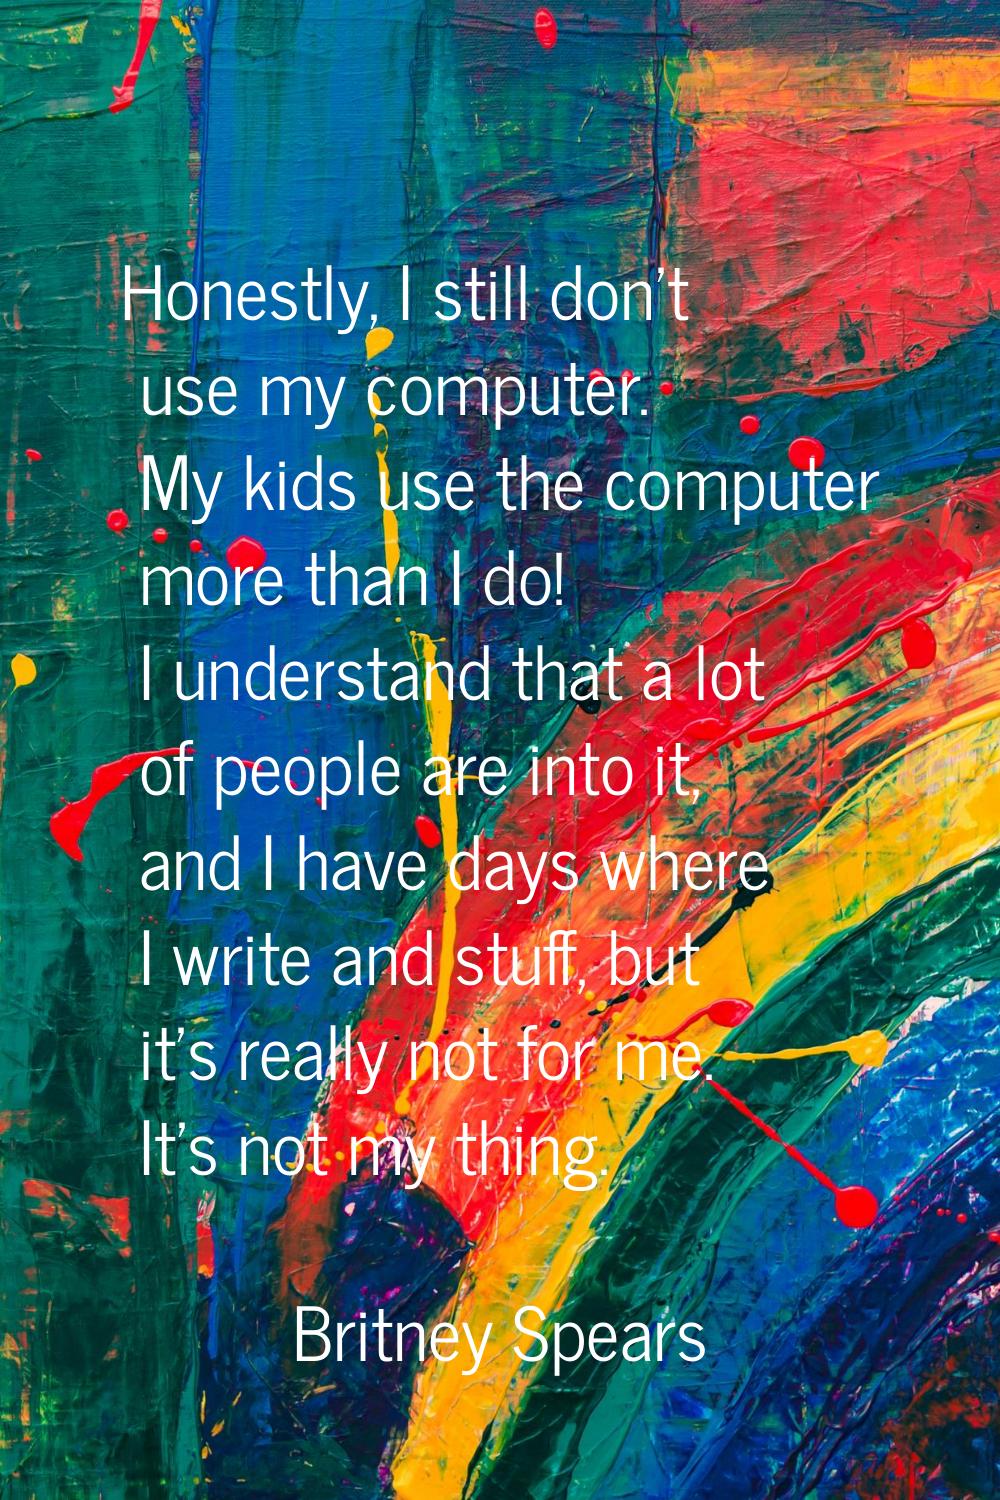 Honestly, I still don't use my computer. My kids use the computer more than I do! I understand that